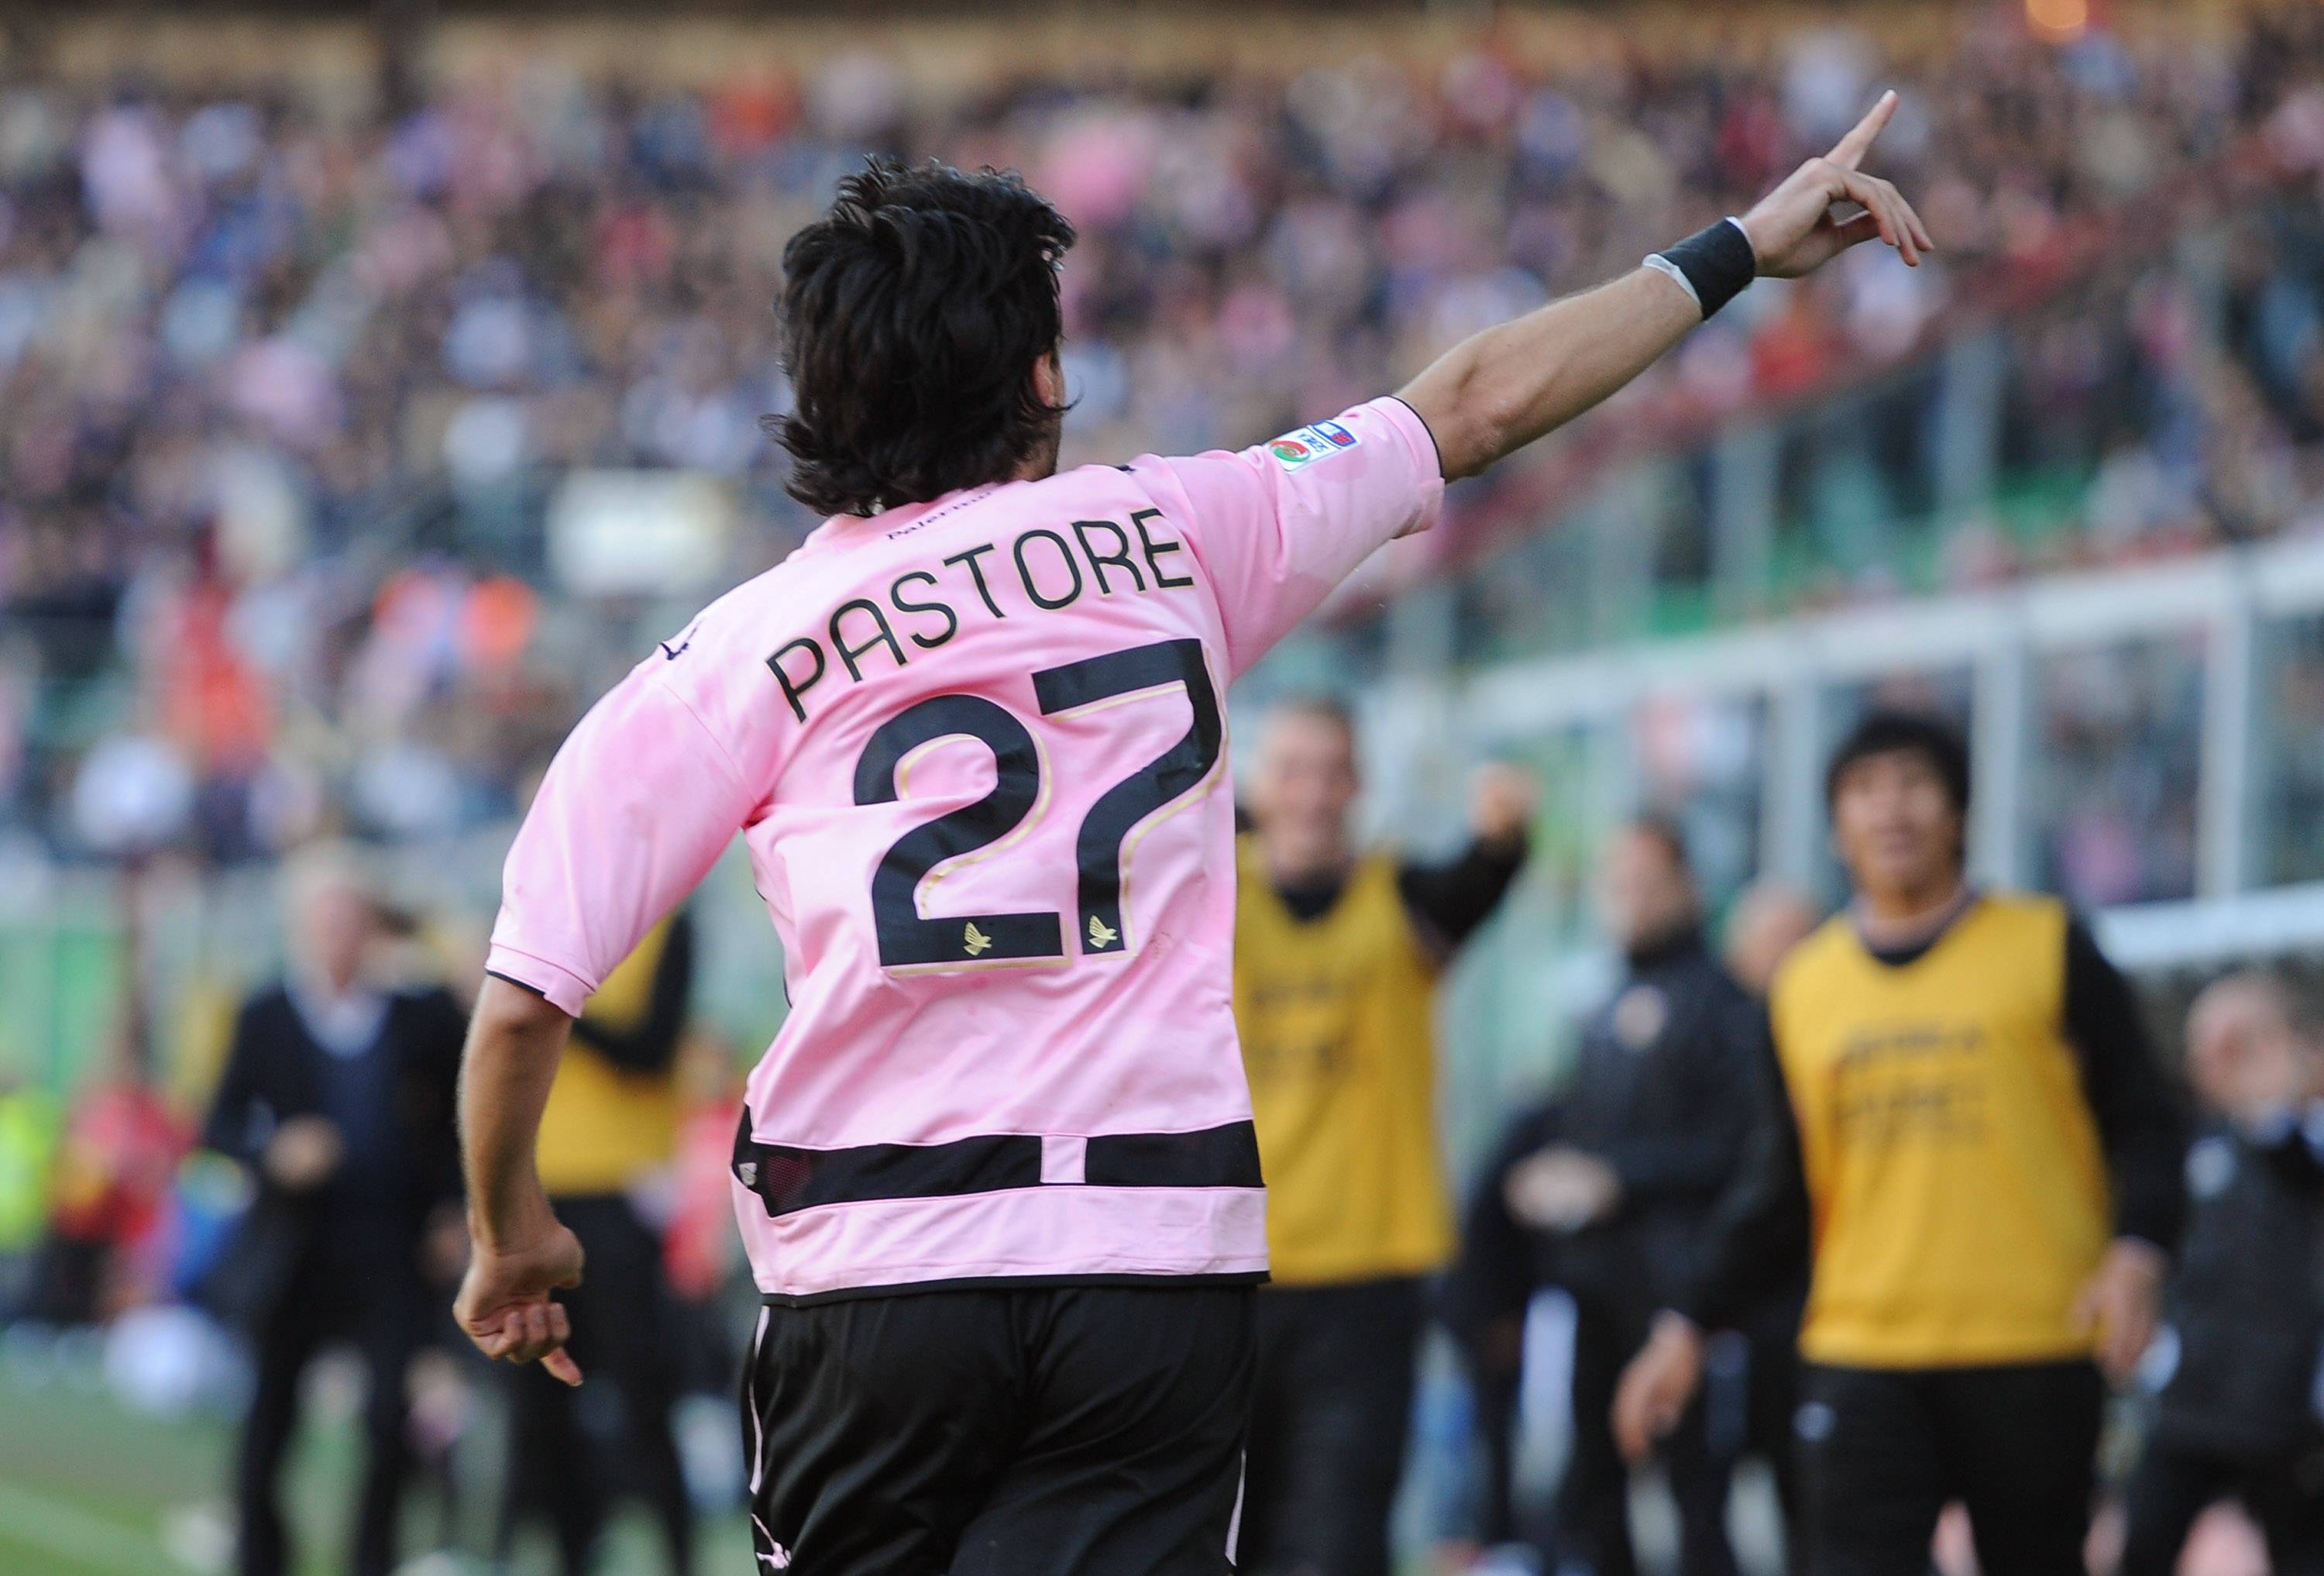 PALERMO, ITALY - NOVEMBER 14:  Javier Pastore of Palermo celebrates after scoring the opening goal during the Serie A match between Palermo and Catania at Stadio Renzo Barbera on November 14, 2010 in Palermo, Italy.  (Photo by Tullio M. Puglia/Getty Image